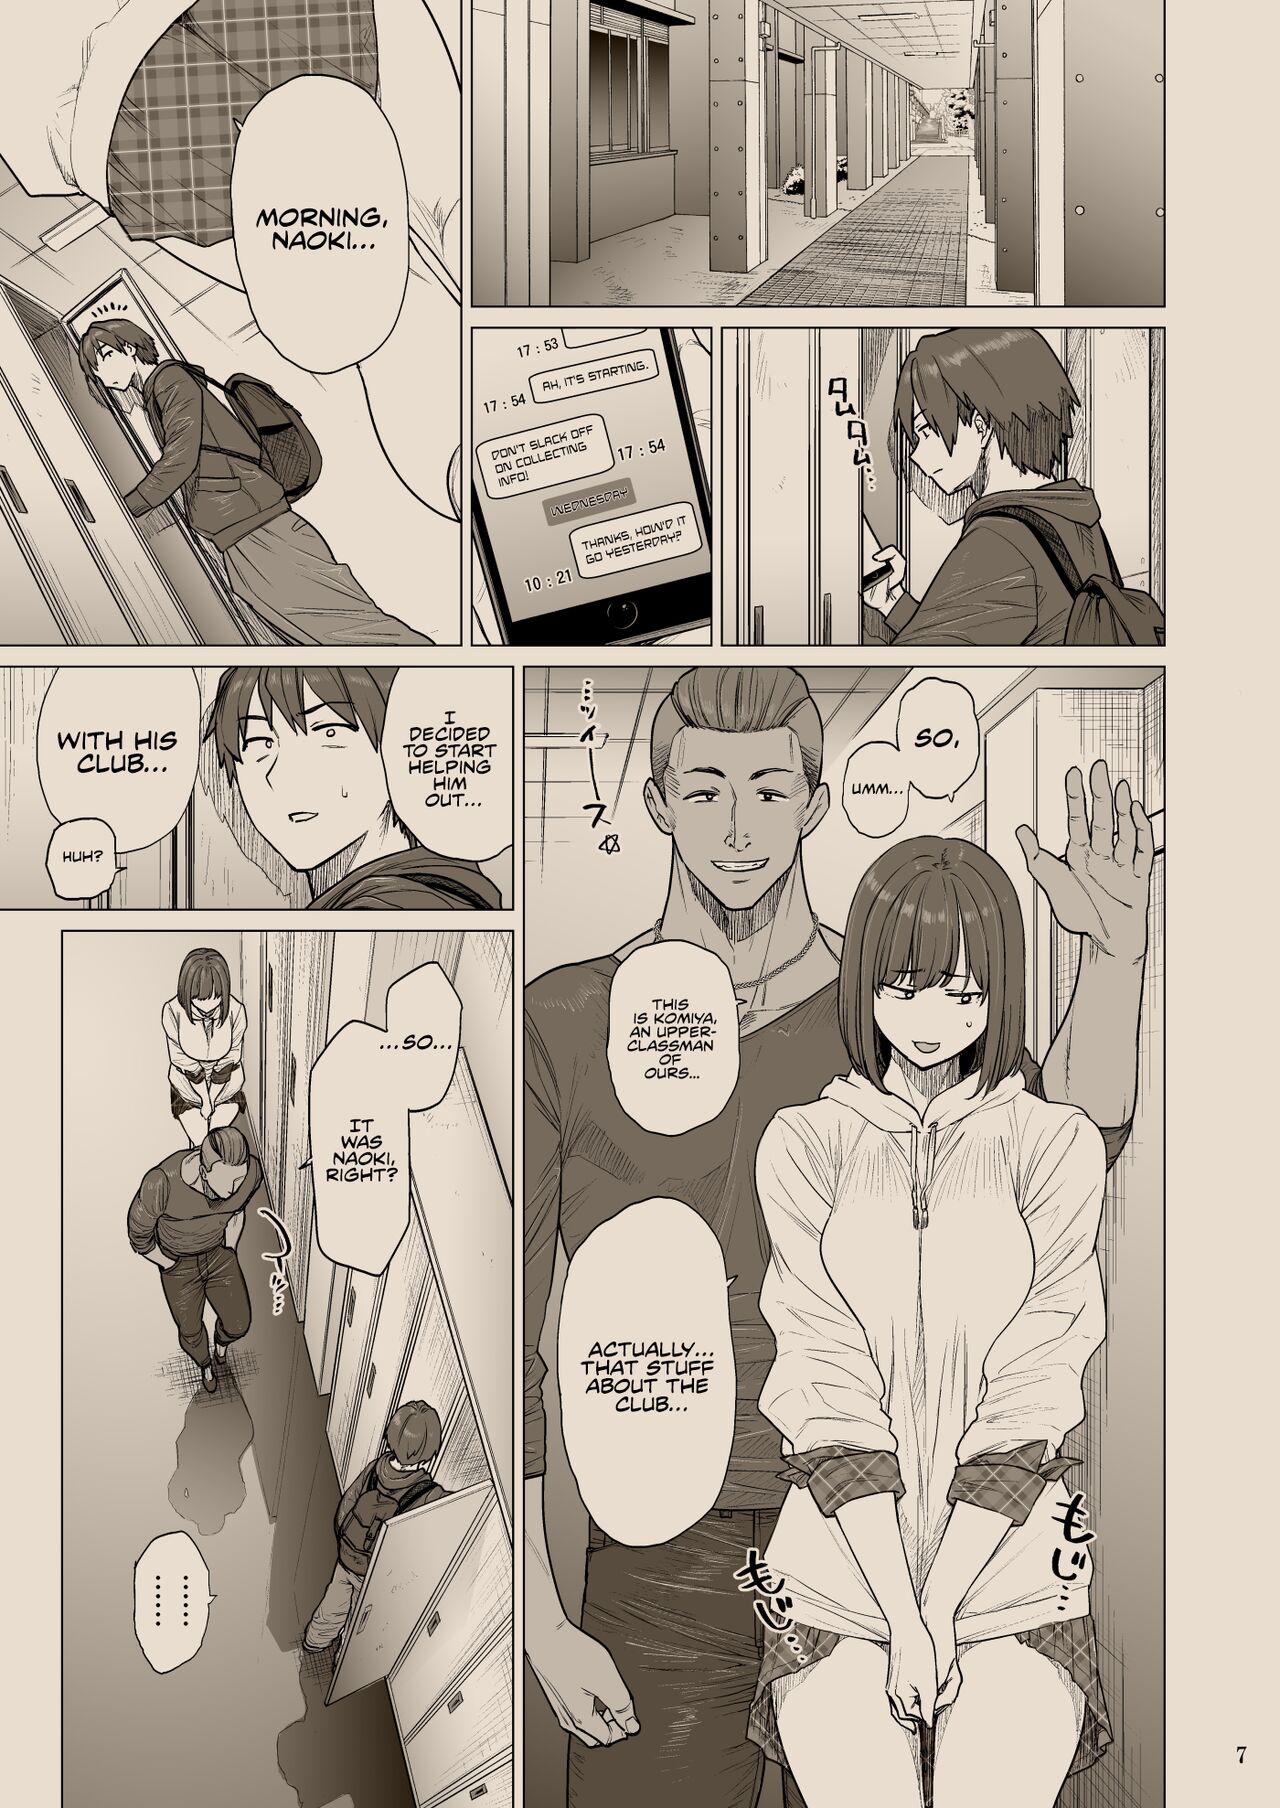 Blows B.S.S.² - My Smart, Beautiful Childhood Friend That I Loved First Became an Assistant of an Upperclassman’s Club and He Did Whatever He Pleased to Her - Original Amateur Cum - Page 6